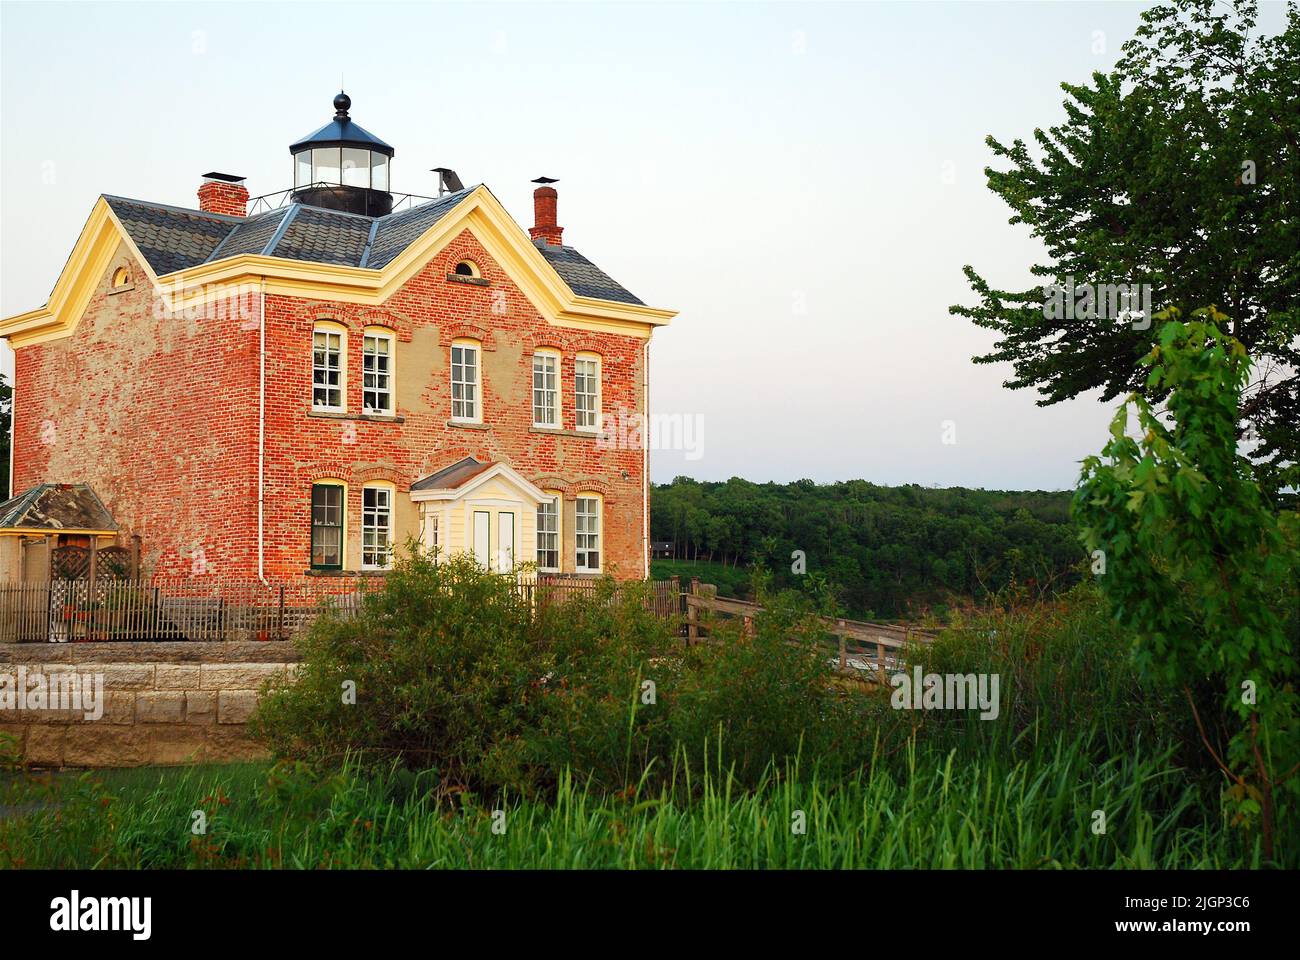 Along with being a navigational aide, the Saugerties Lighthouse on the Hudson River serves as an inn and bed and breakfast Stock Photo